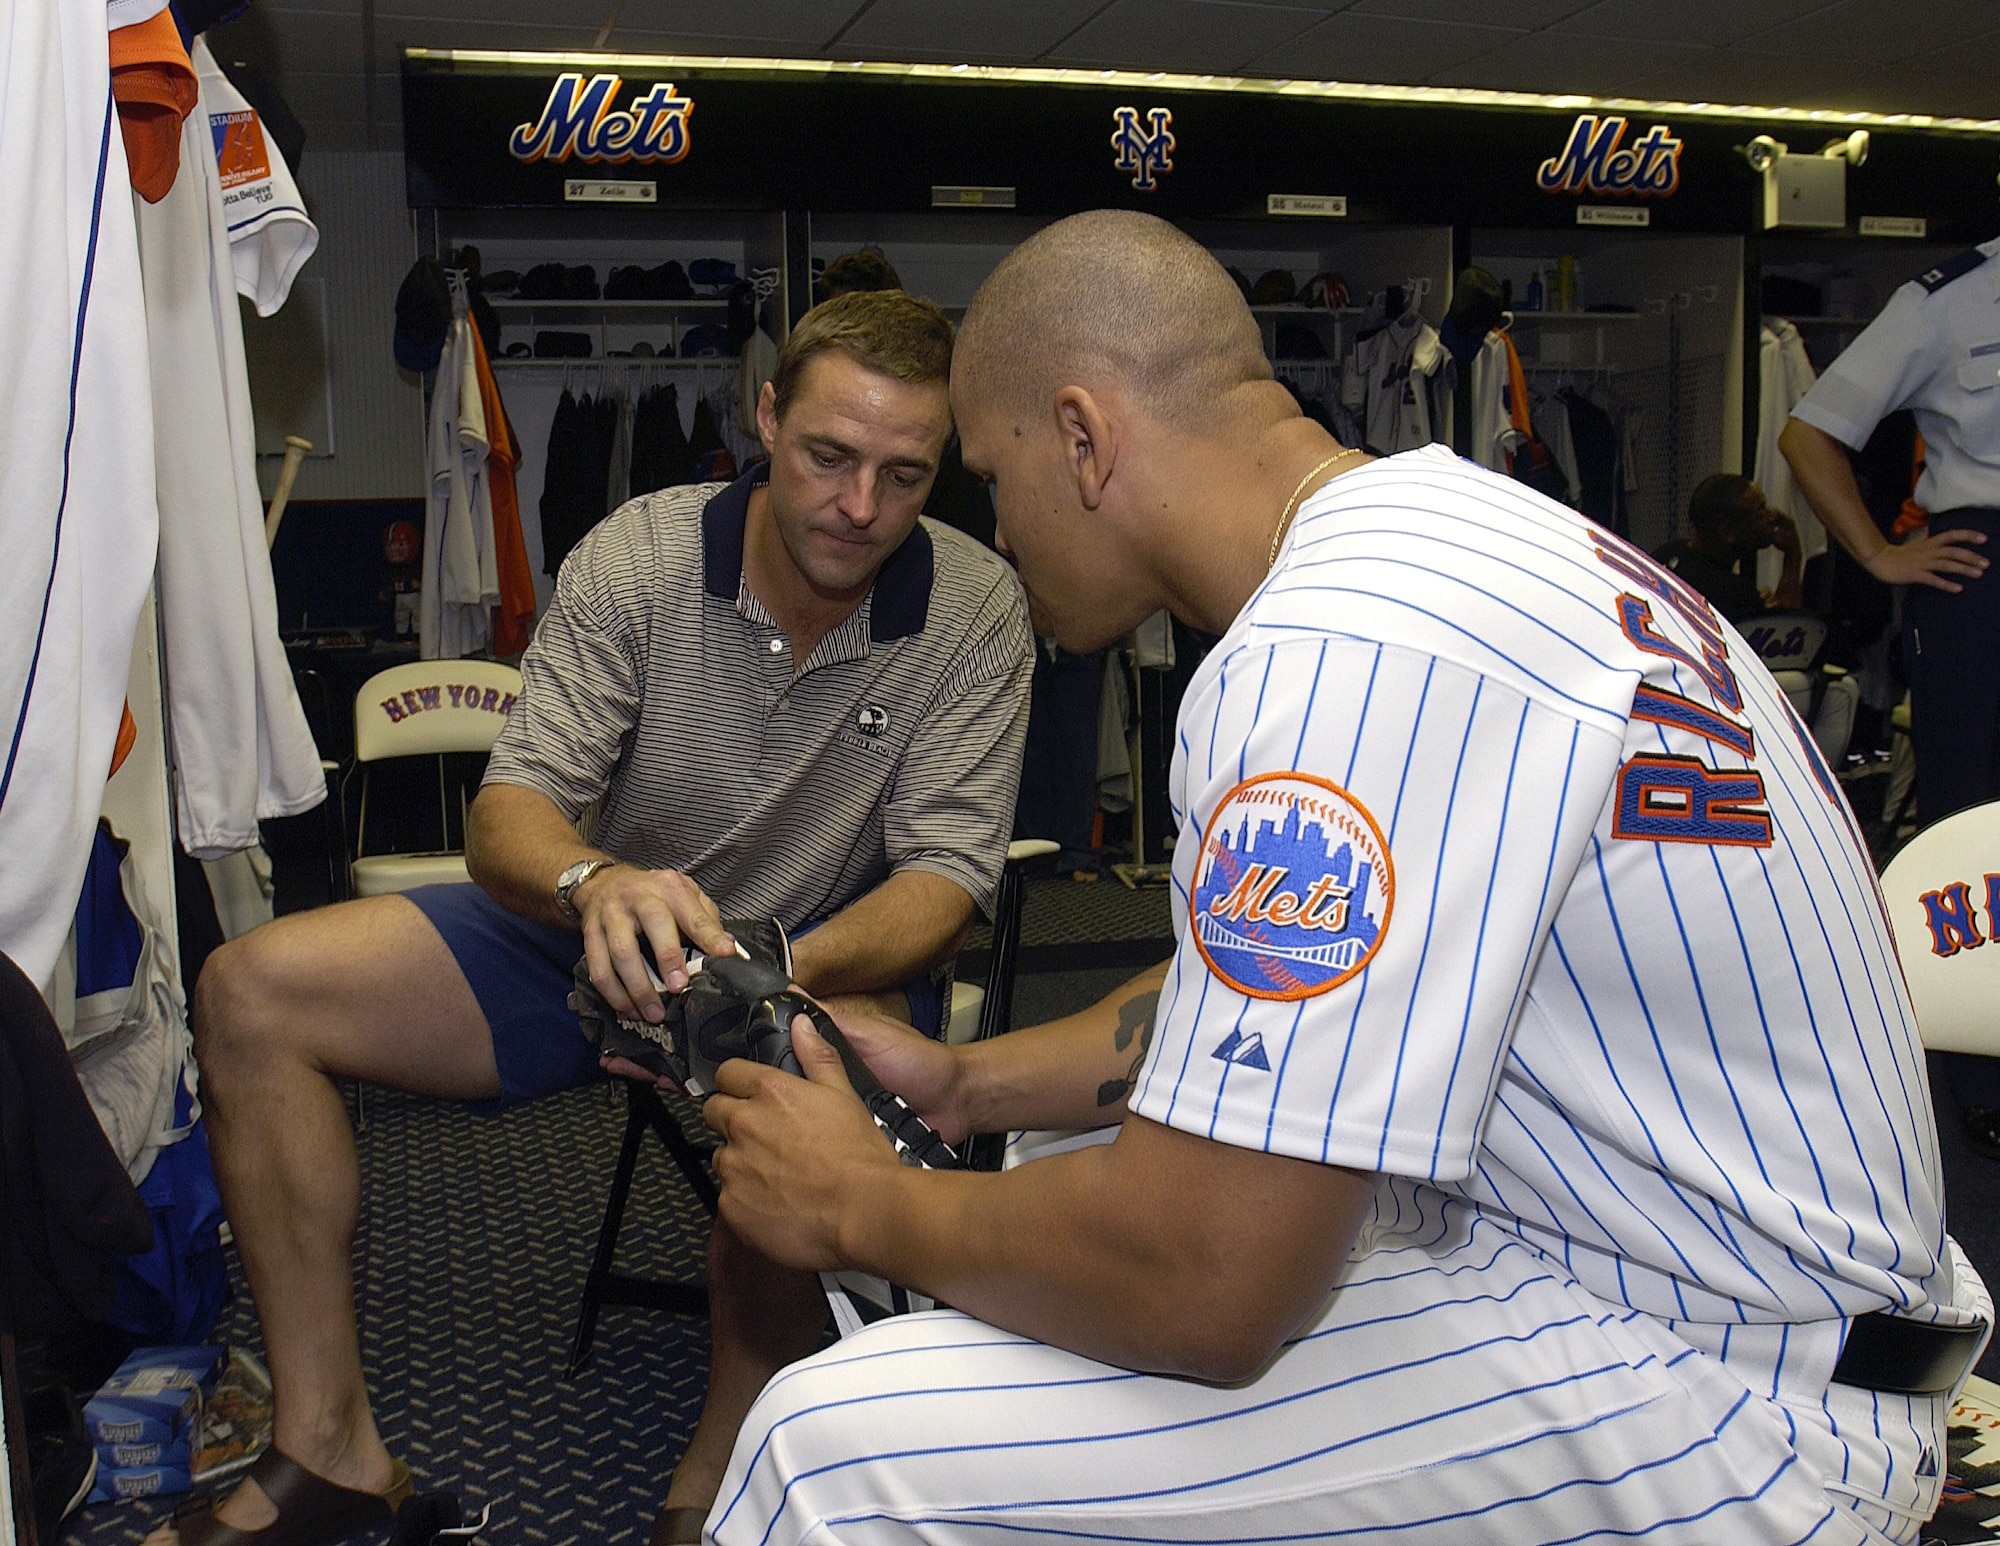 NEW YORK -- New York Mets pitcher Al Leiter gives a pair of cleats to Senior Airman Chardo Richardson at Shea Stadium on June 22.  Airman Richardson was here for the second part of a job swap with Mr. Leiter.  The Mets pitcher was a boom operator for a day at McGuire Air Force Base, N.J., on May 24.  Airman Richardson is a boom operator with the 32nd Air Refueling Squadron at McGuire.  (U.S. Air Force photo by Kenn Mann)